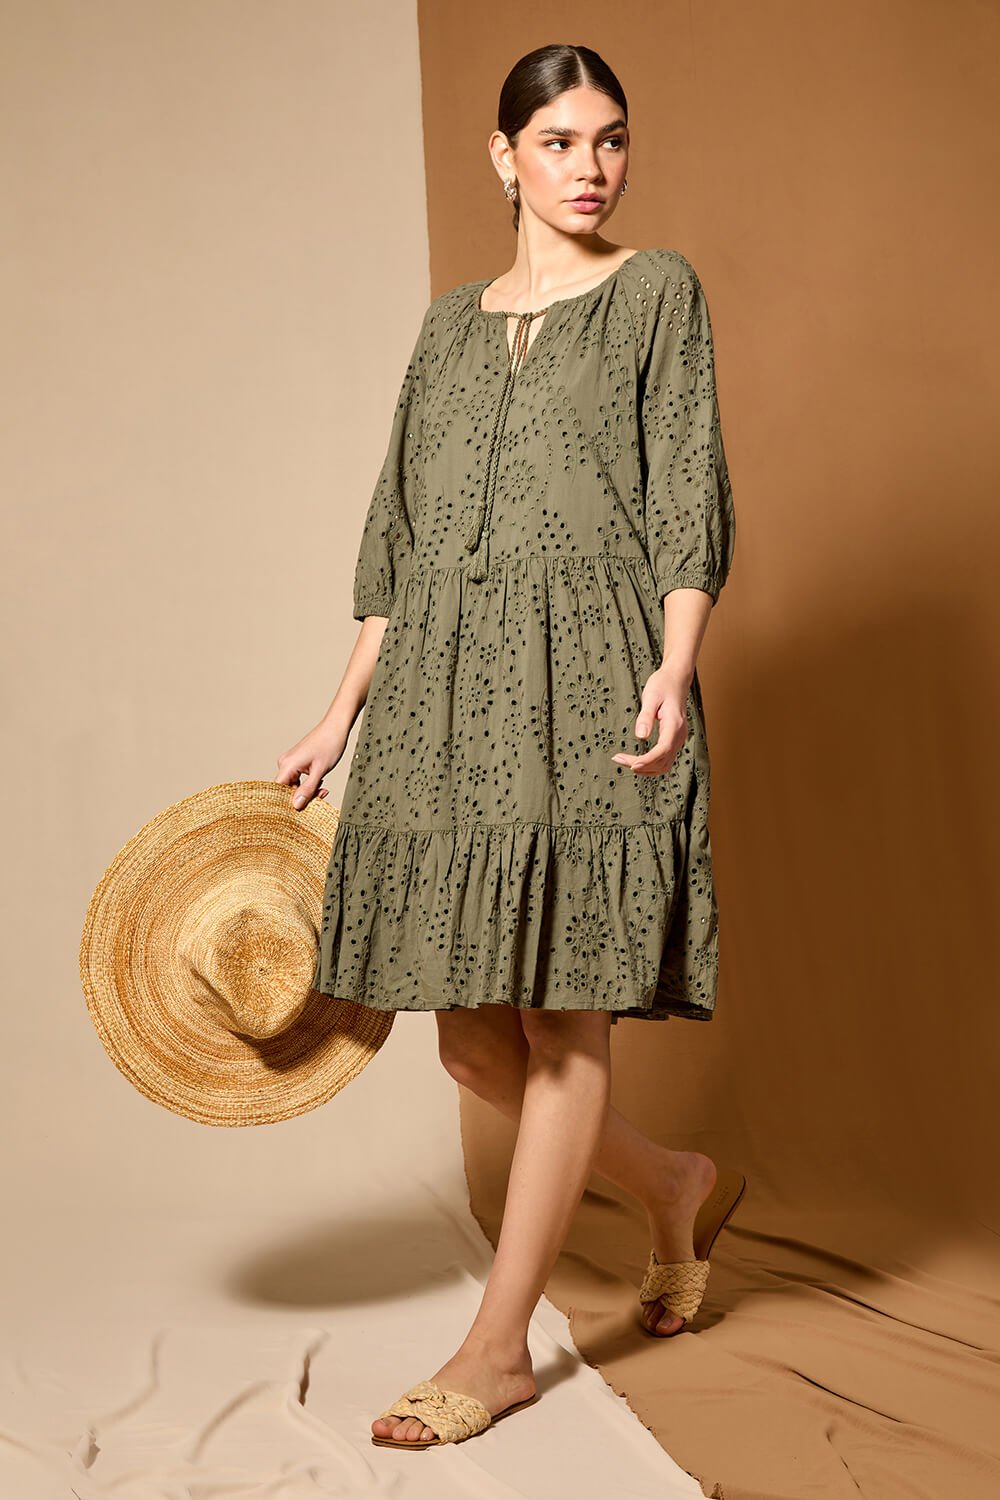 KHAKI Cotton Broderie Tiered Smock Dress, Image 6 of 7